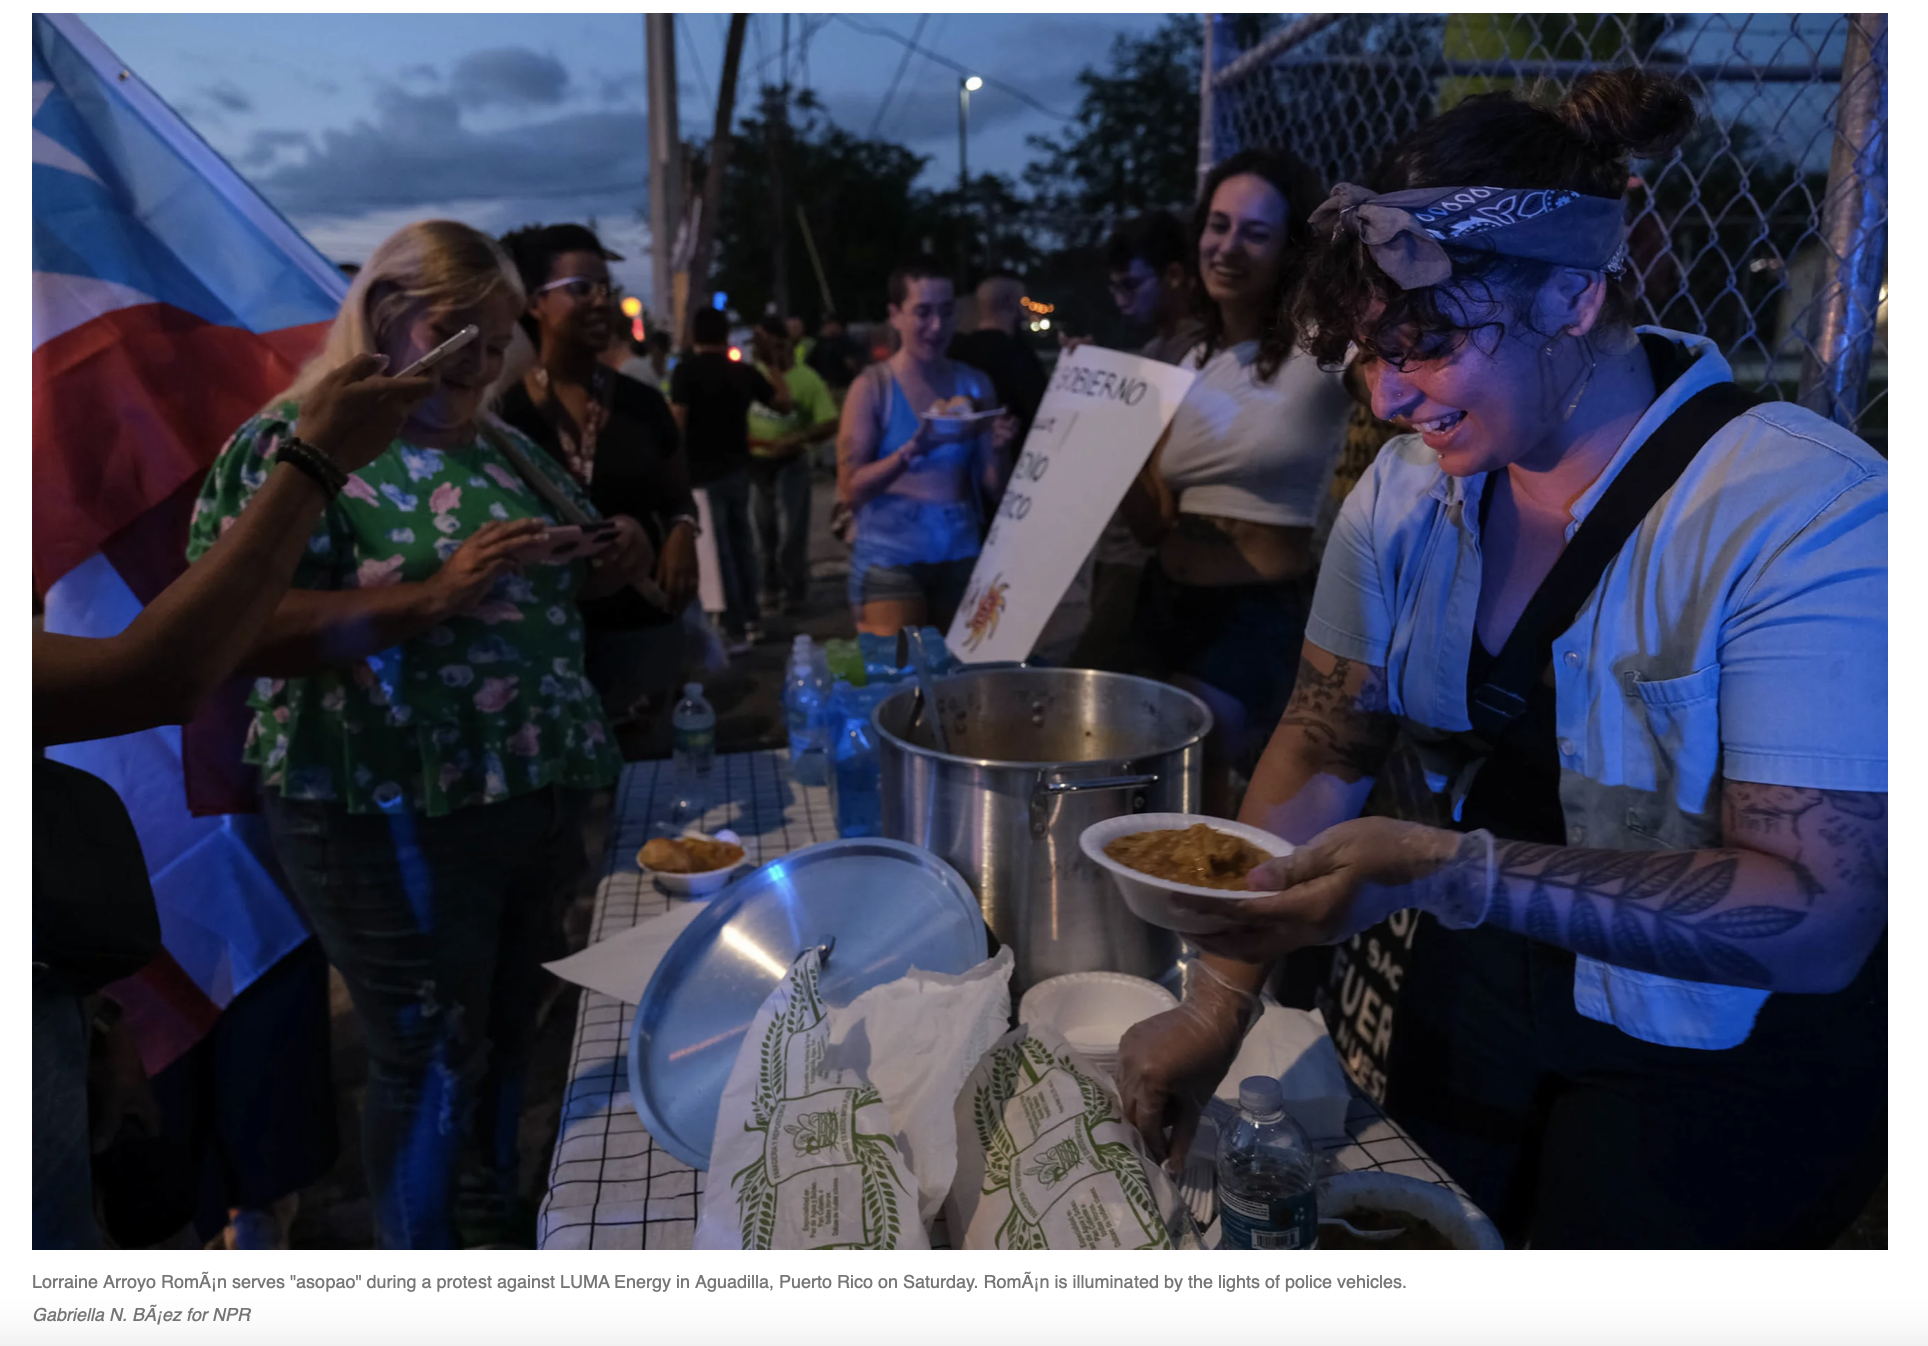 Thumbnail of NPR: As hurricanes put Puerto Rico's government to the test, neighbors keep each other fed